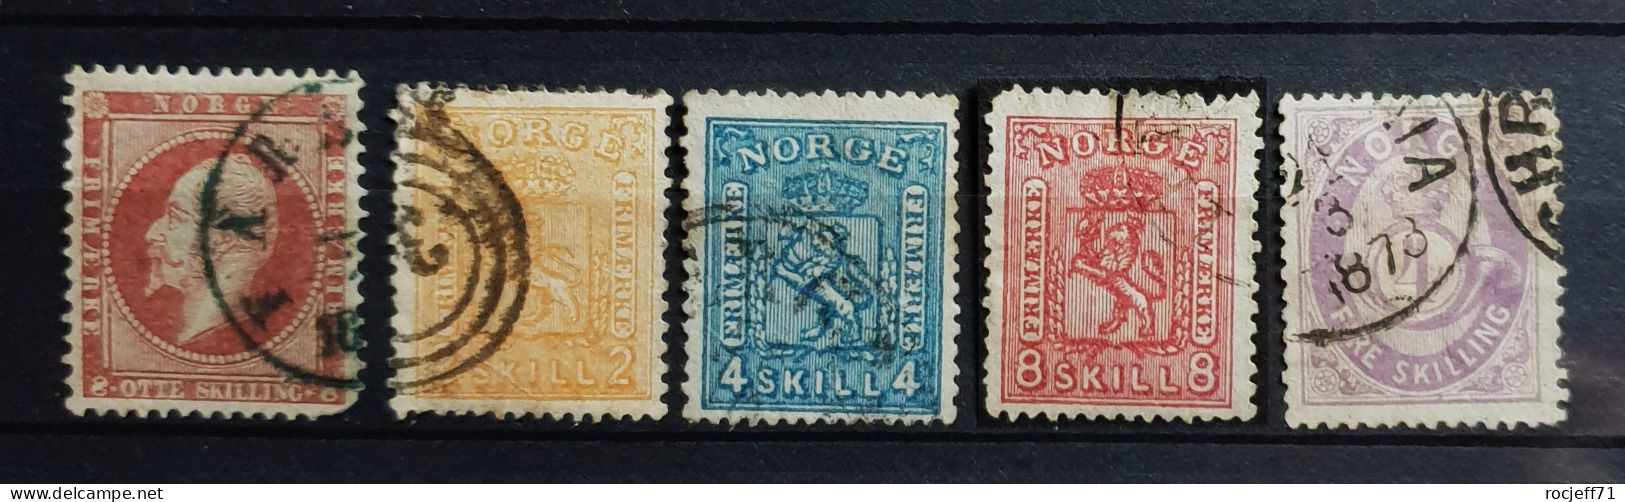 05 - 24 - Gino - Norvege Lot De Vieux Timbres - Norway Old Stamps - Value : 280 Euros - Gebraucht